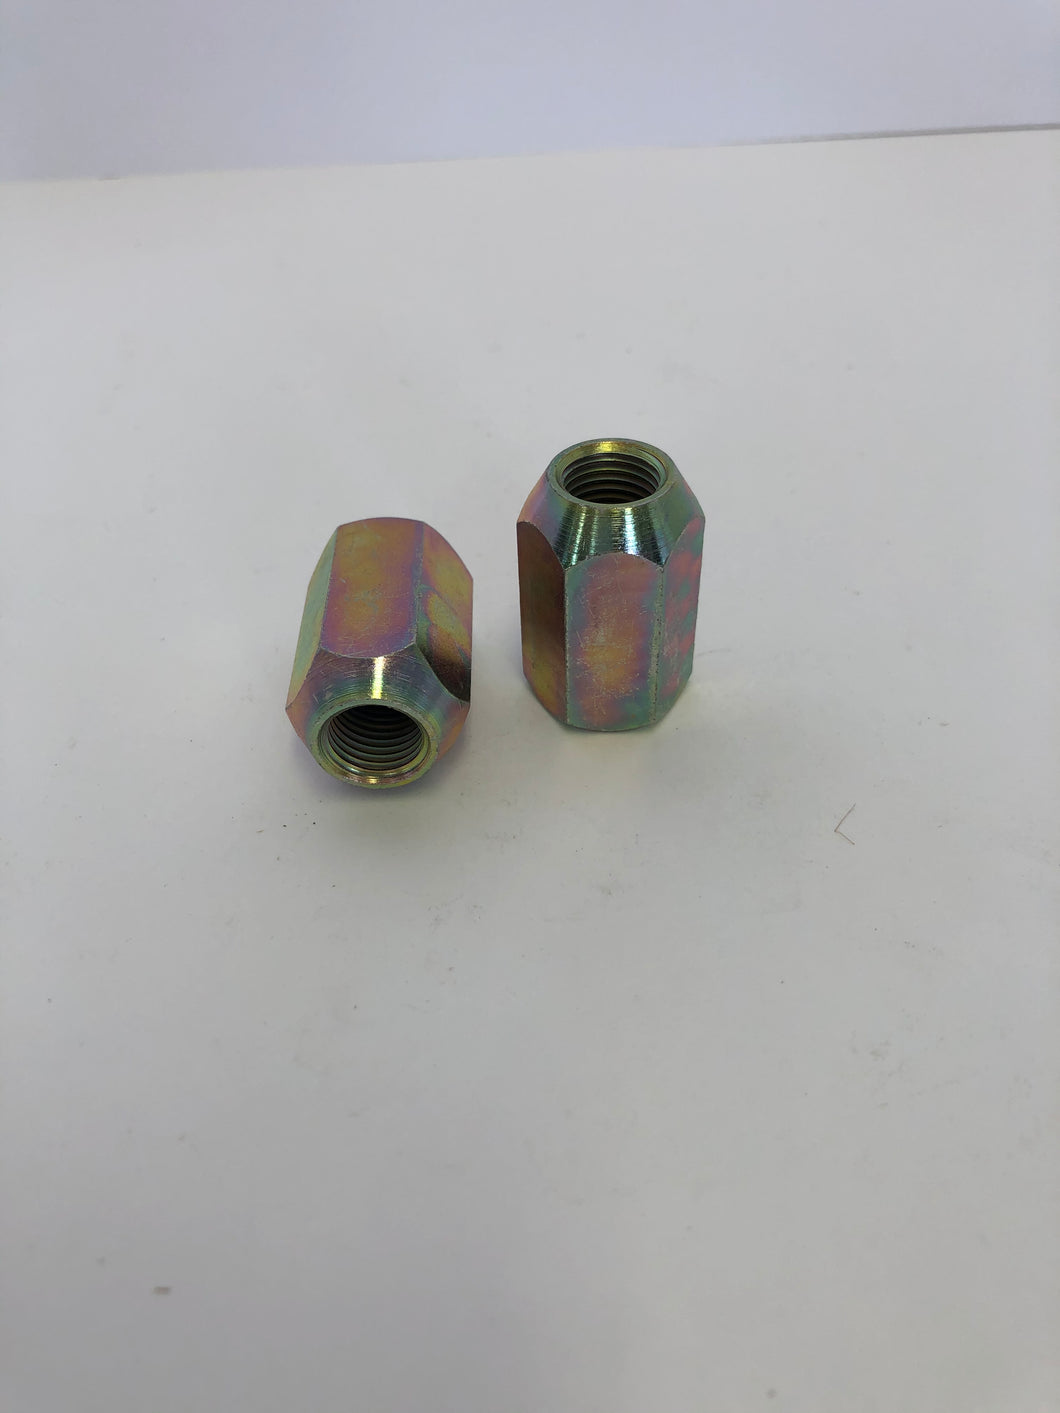 48.819-1 One replacement lug nut (12mm x 1.25p) 19mm hex; Cone Seat; Subaru; Nissan